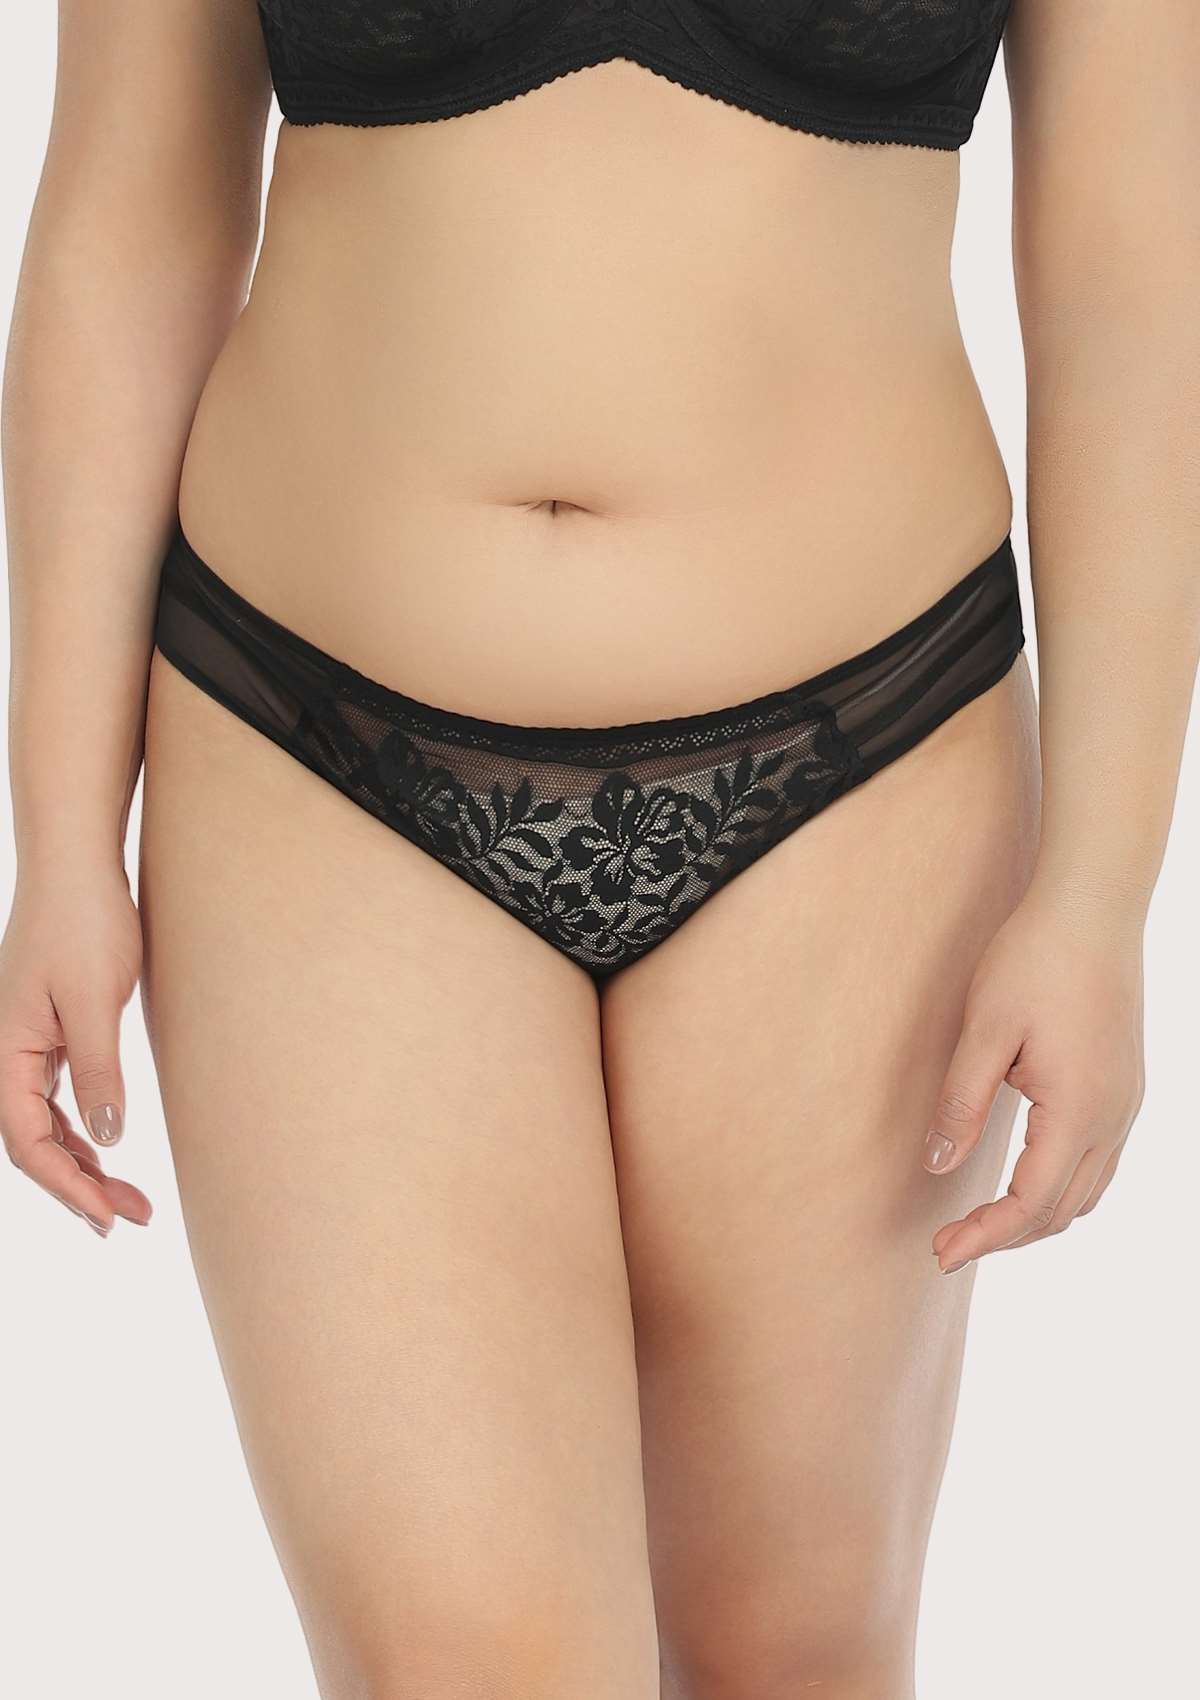 HSIA Gladioli Floral Lace Mesh Flattering Playful Panty Underwear